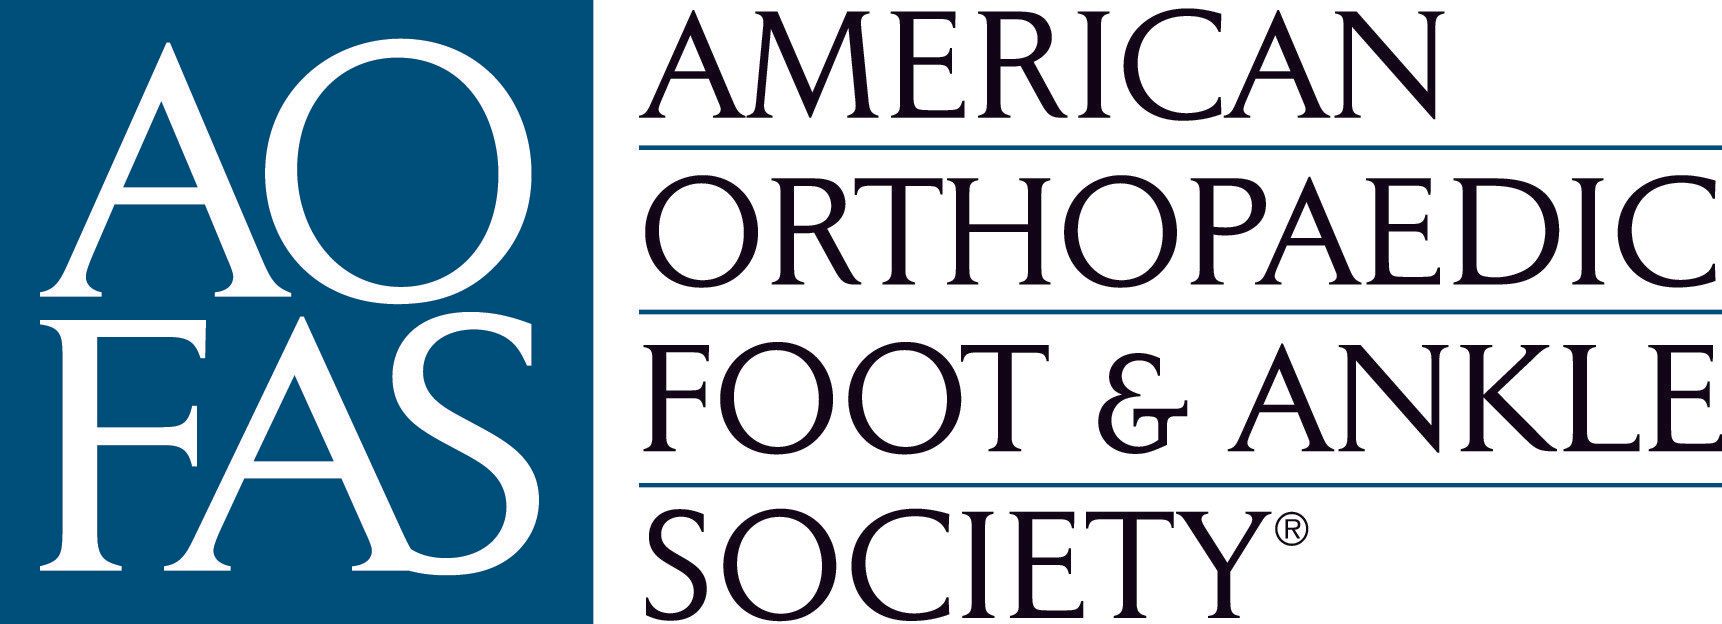 American Orthopedic Foot and Ankle Society (AOFAS)